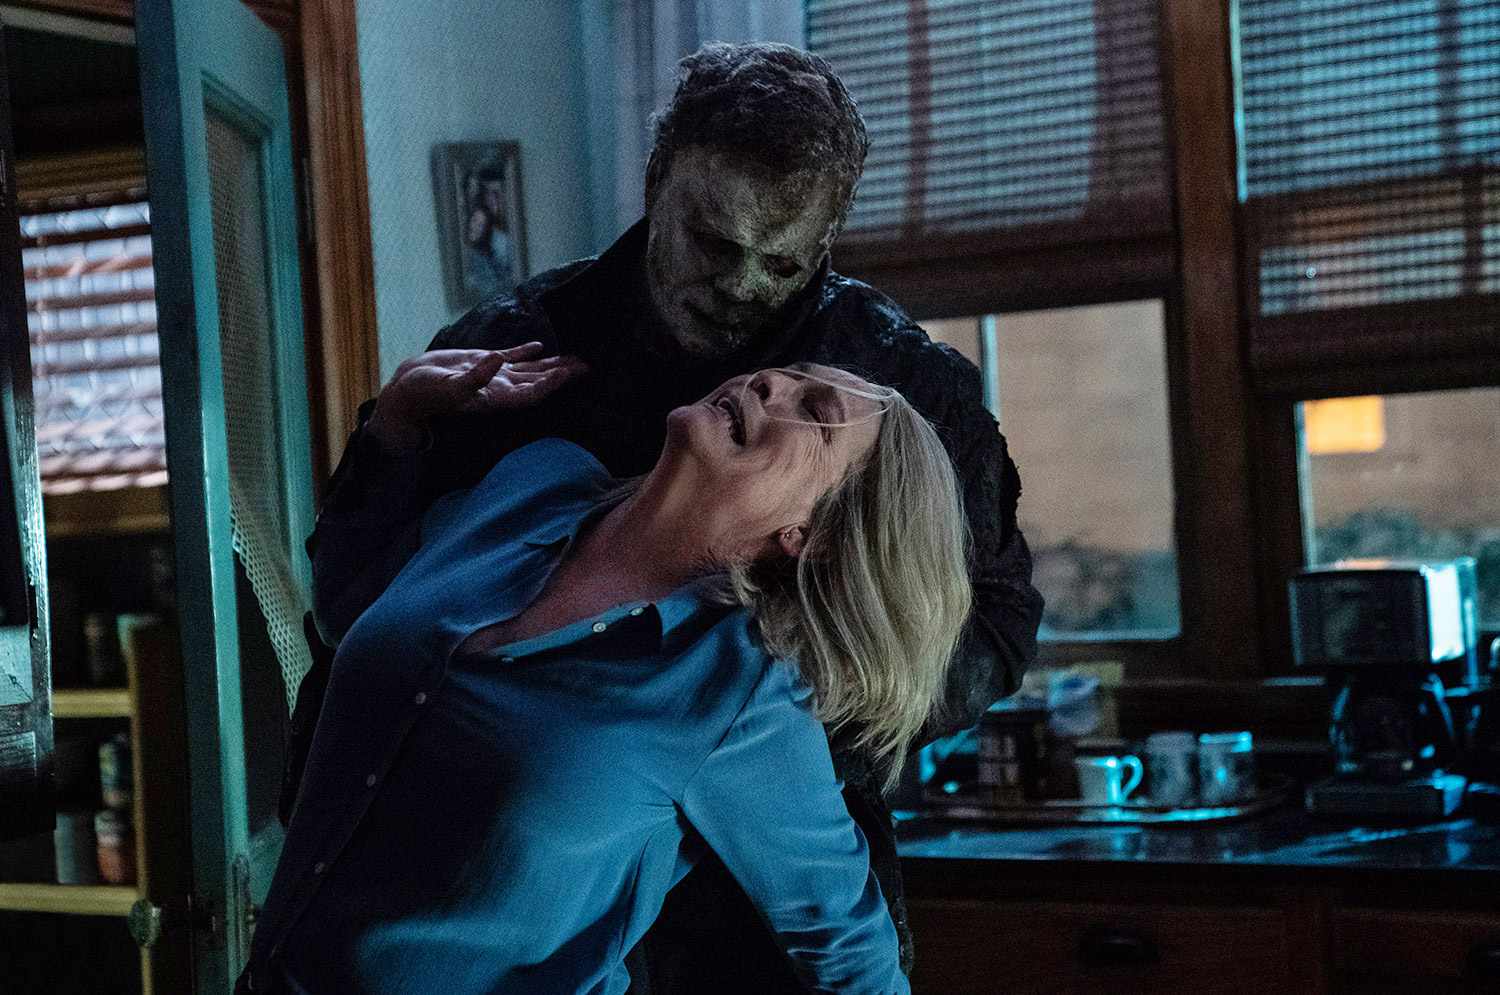 Michael Myers (aka The Shape) and Jamie Lee Curtis as Laurie Strode in HALLOWEEN ENDS, directed by David Gordon Gree